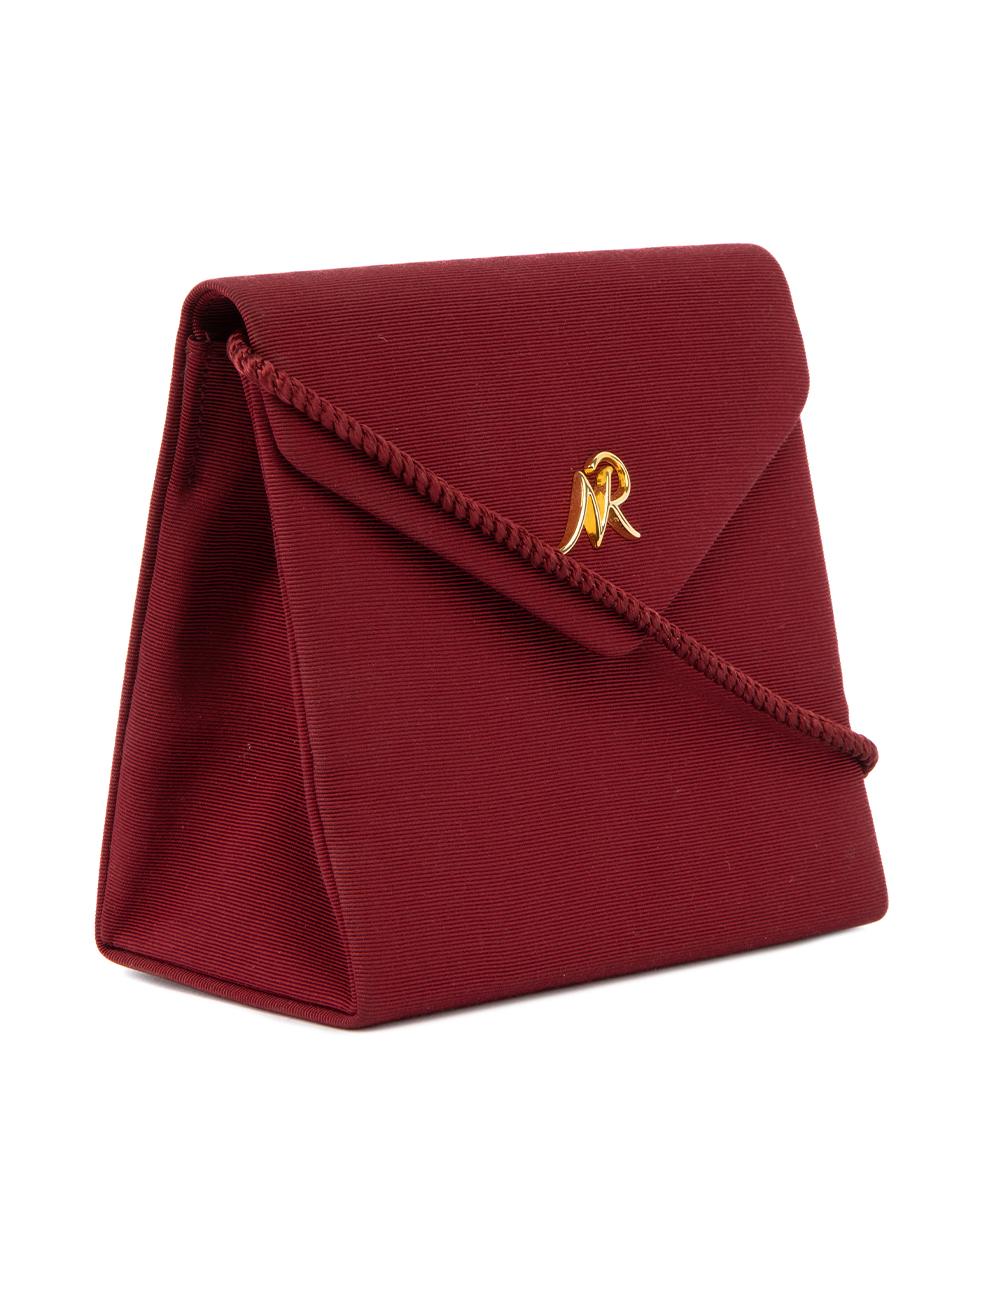 CONDITION is Very good. Hardly any wear to bag is evident. Slight dent can be seen to the front left on this used Nina Ricci designer resale item. Details Burgundy Cloth textile Mini crossbody Envelope flap with magnetic button closure Golf NR logo